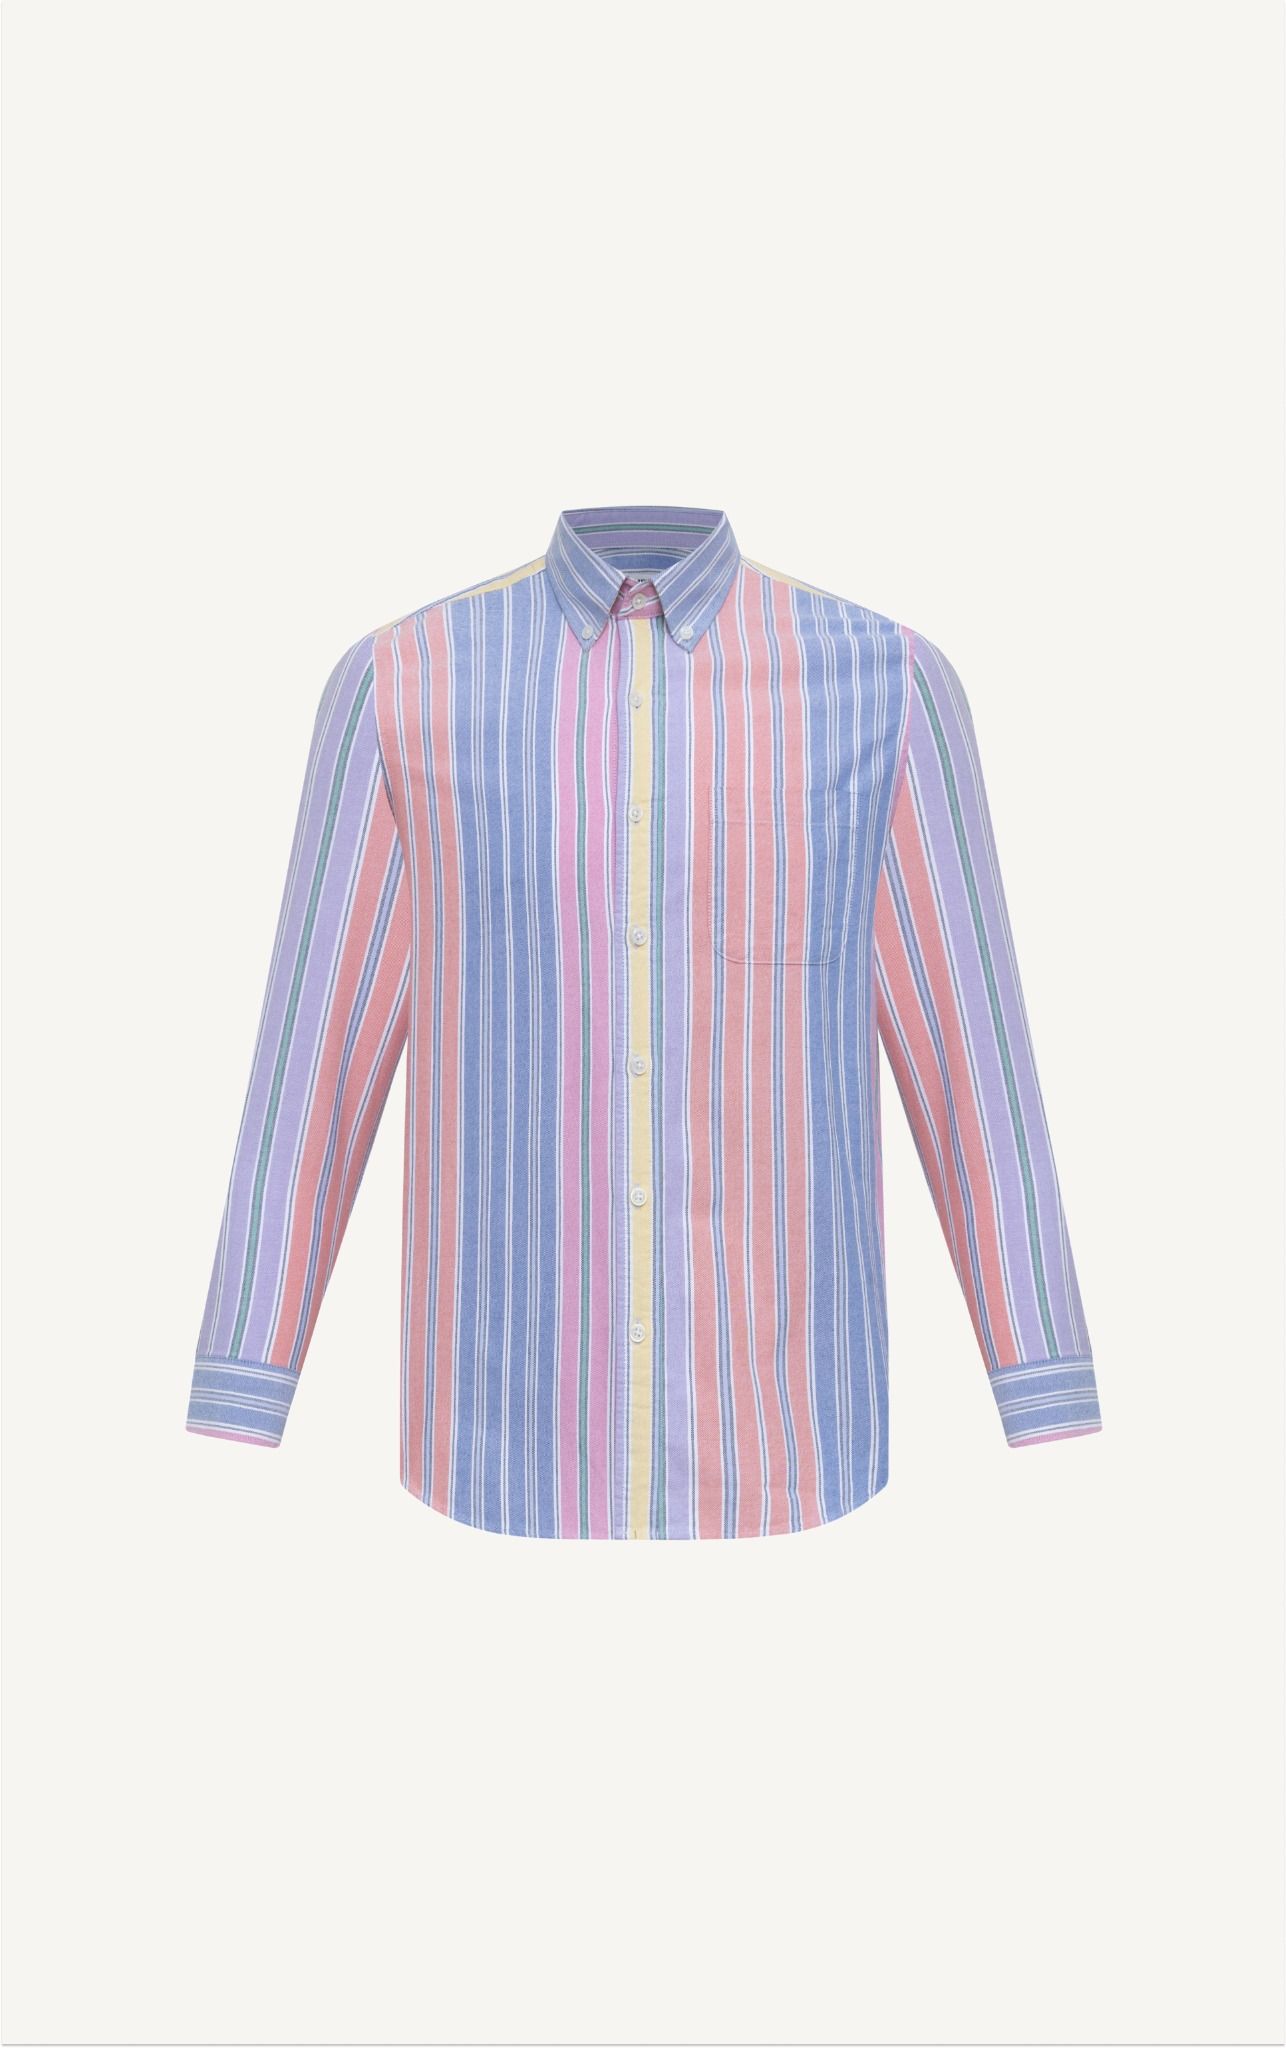  AG300 FACTORY REGULAR FIT MULTI-COLORED VERTICAL STRIPED SHIRT - YELLOW 